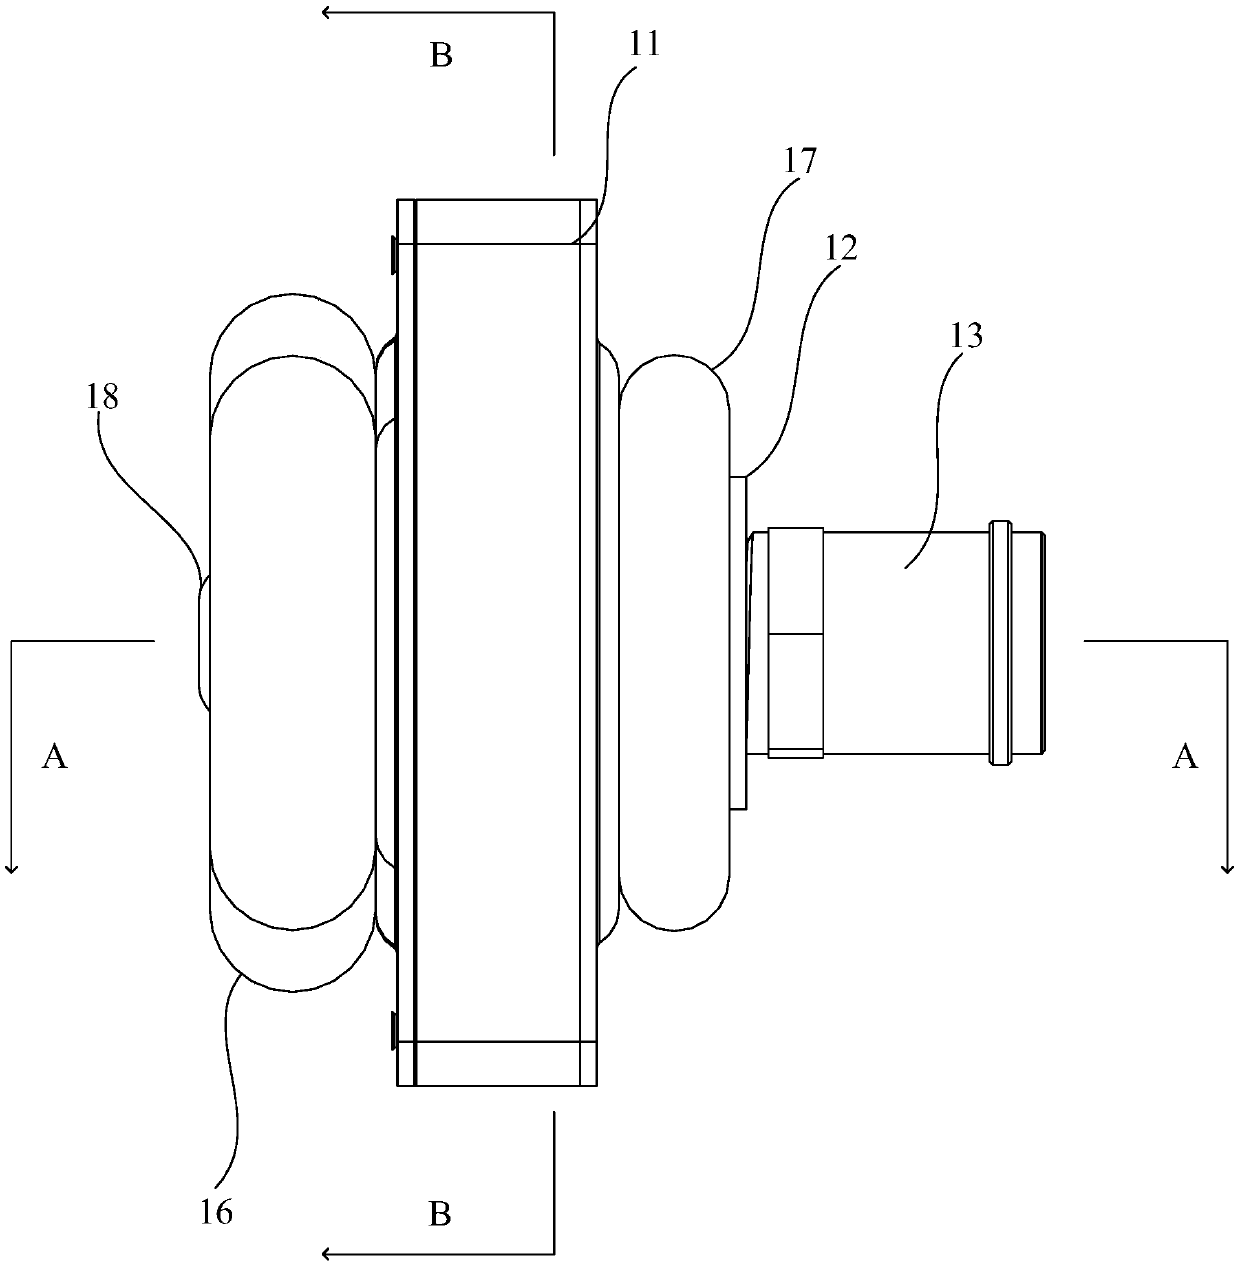 Liquid cooling plug-in assembly, liquid cooling plug-in device and battery pack assembly